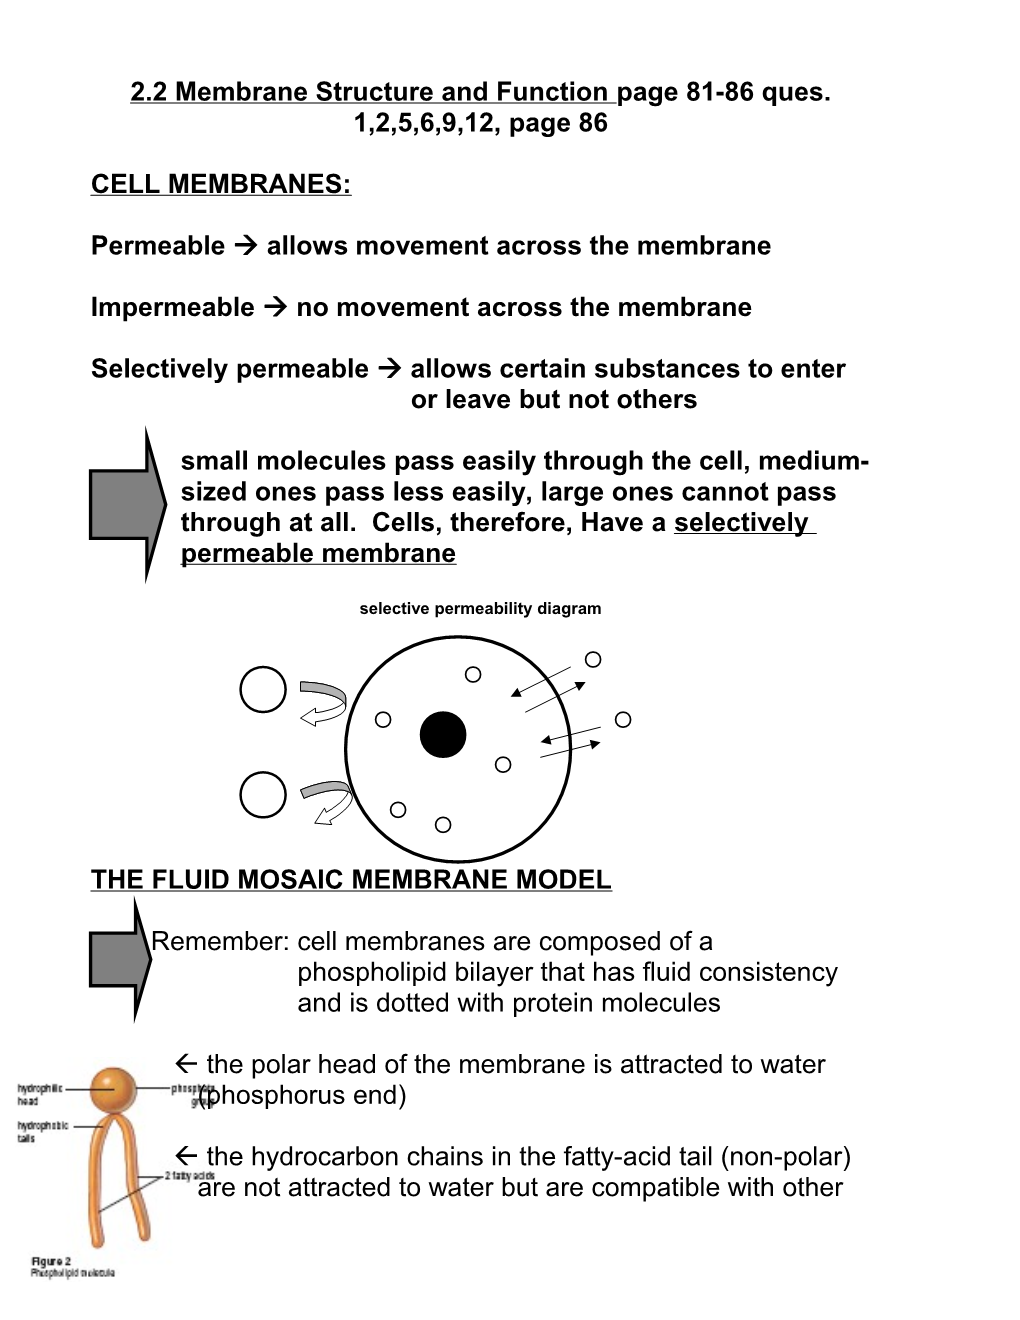 How Cells Move Materials in and Out s1